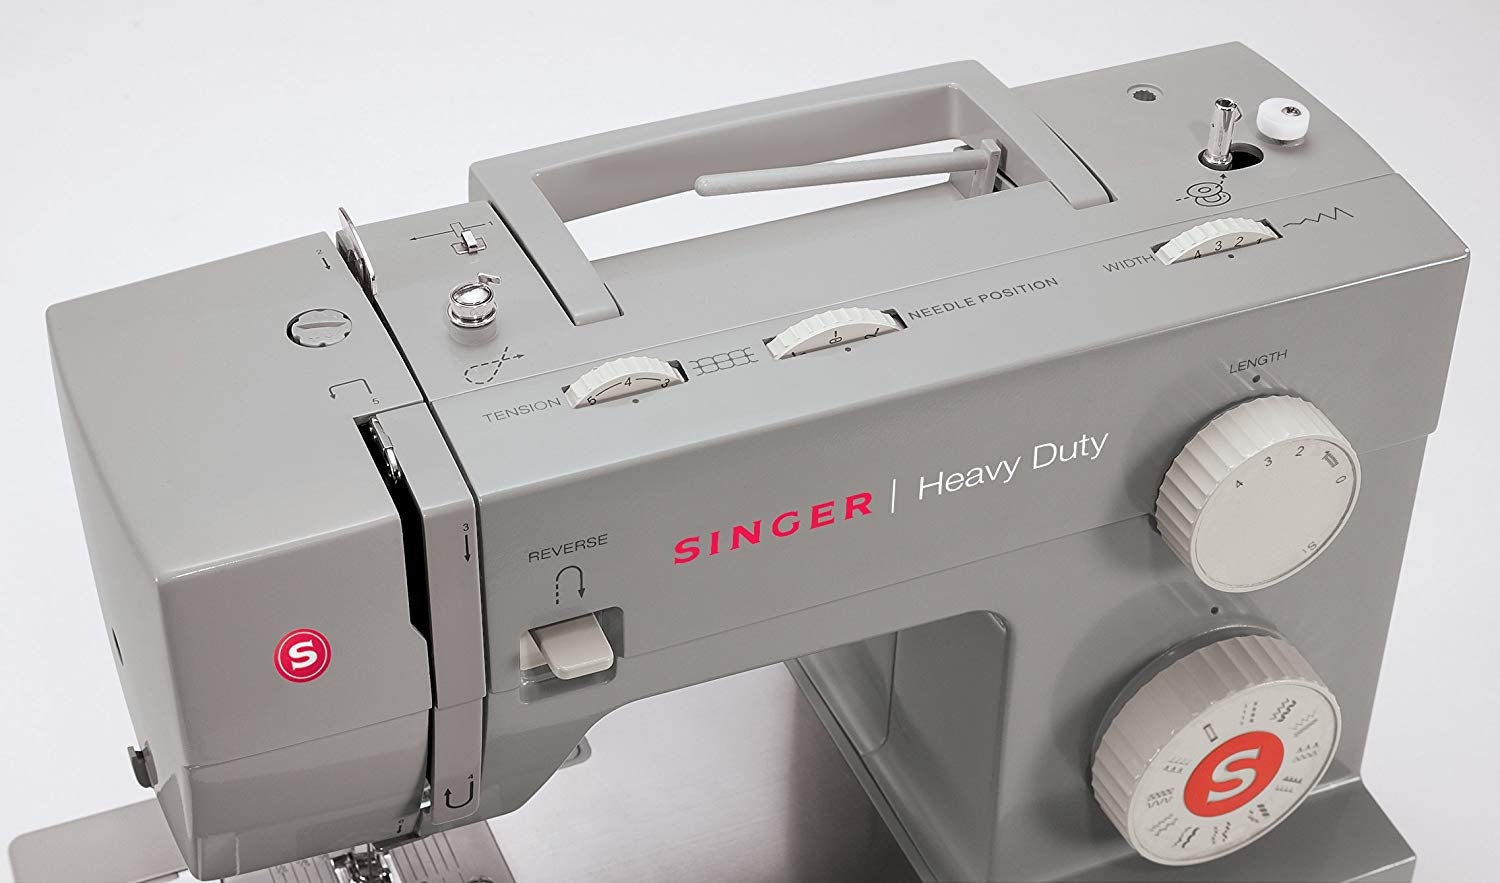 NEW Best Price SINGER Heavy Duty 4452 Sewing Machine With 32 Built-in  Stitches, Metal Frame, Built-in Needle Threader, & Accessory Kit 